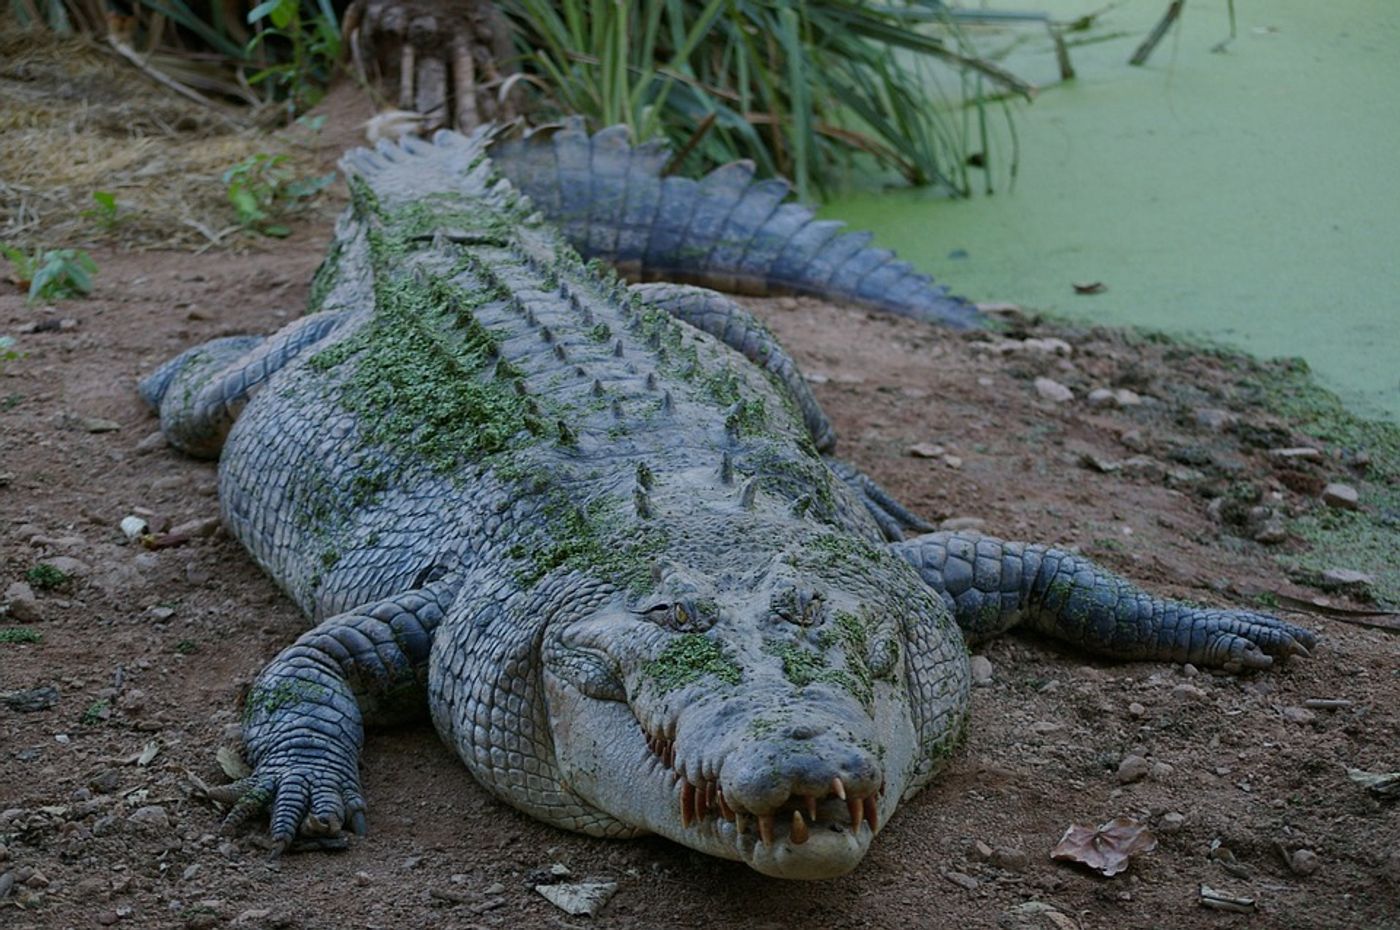 The crocodile that attacked Anne Cameron (not pictured) was over 14 feet long.